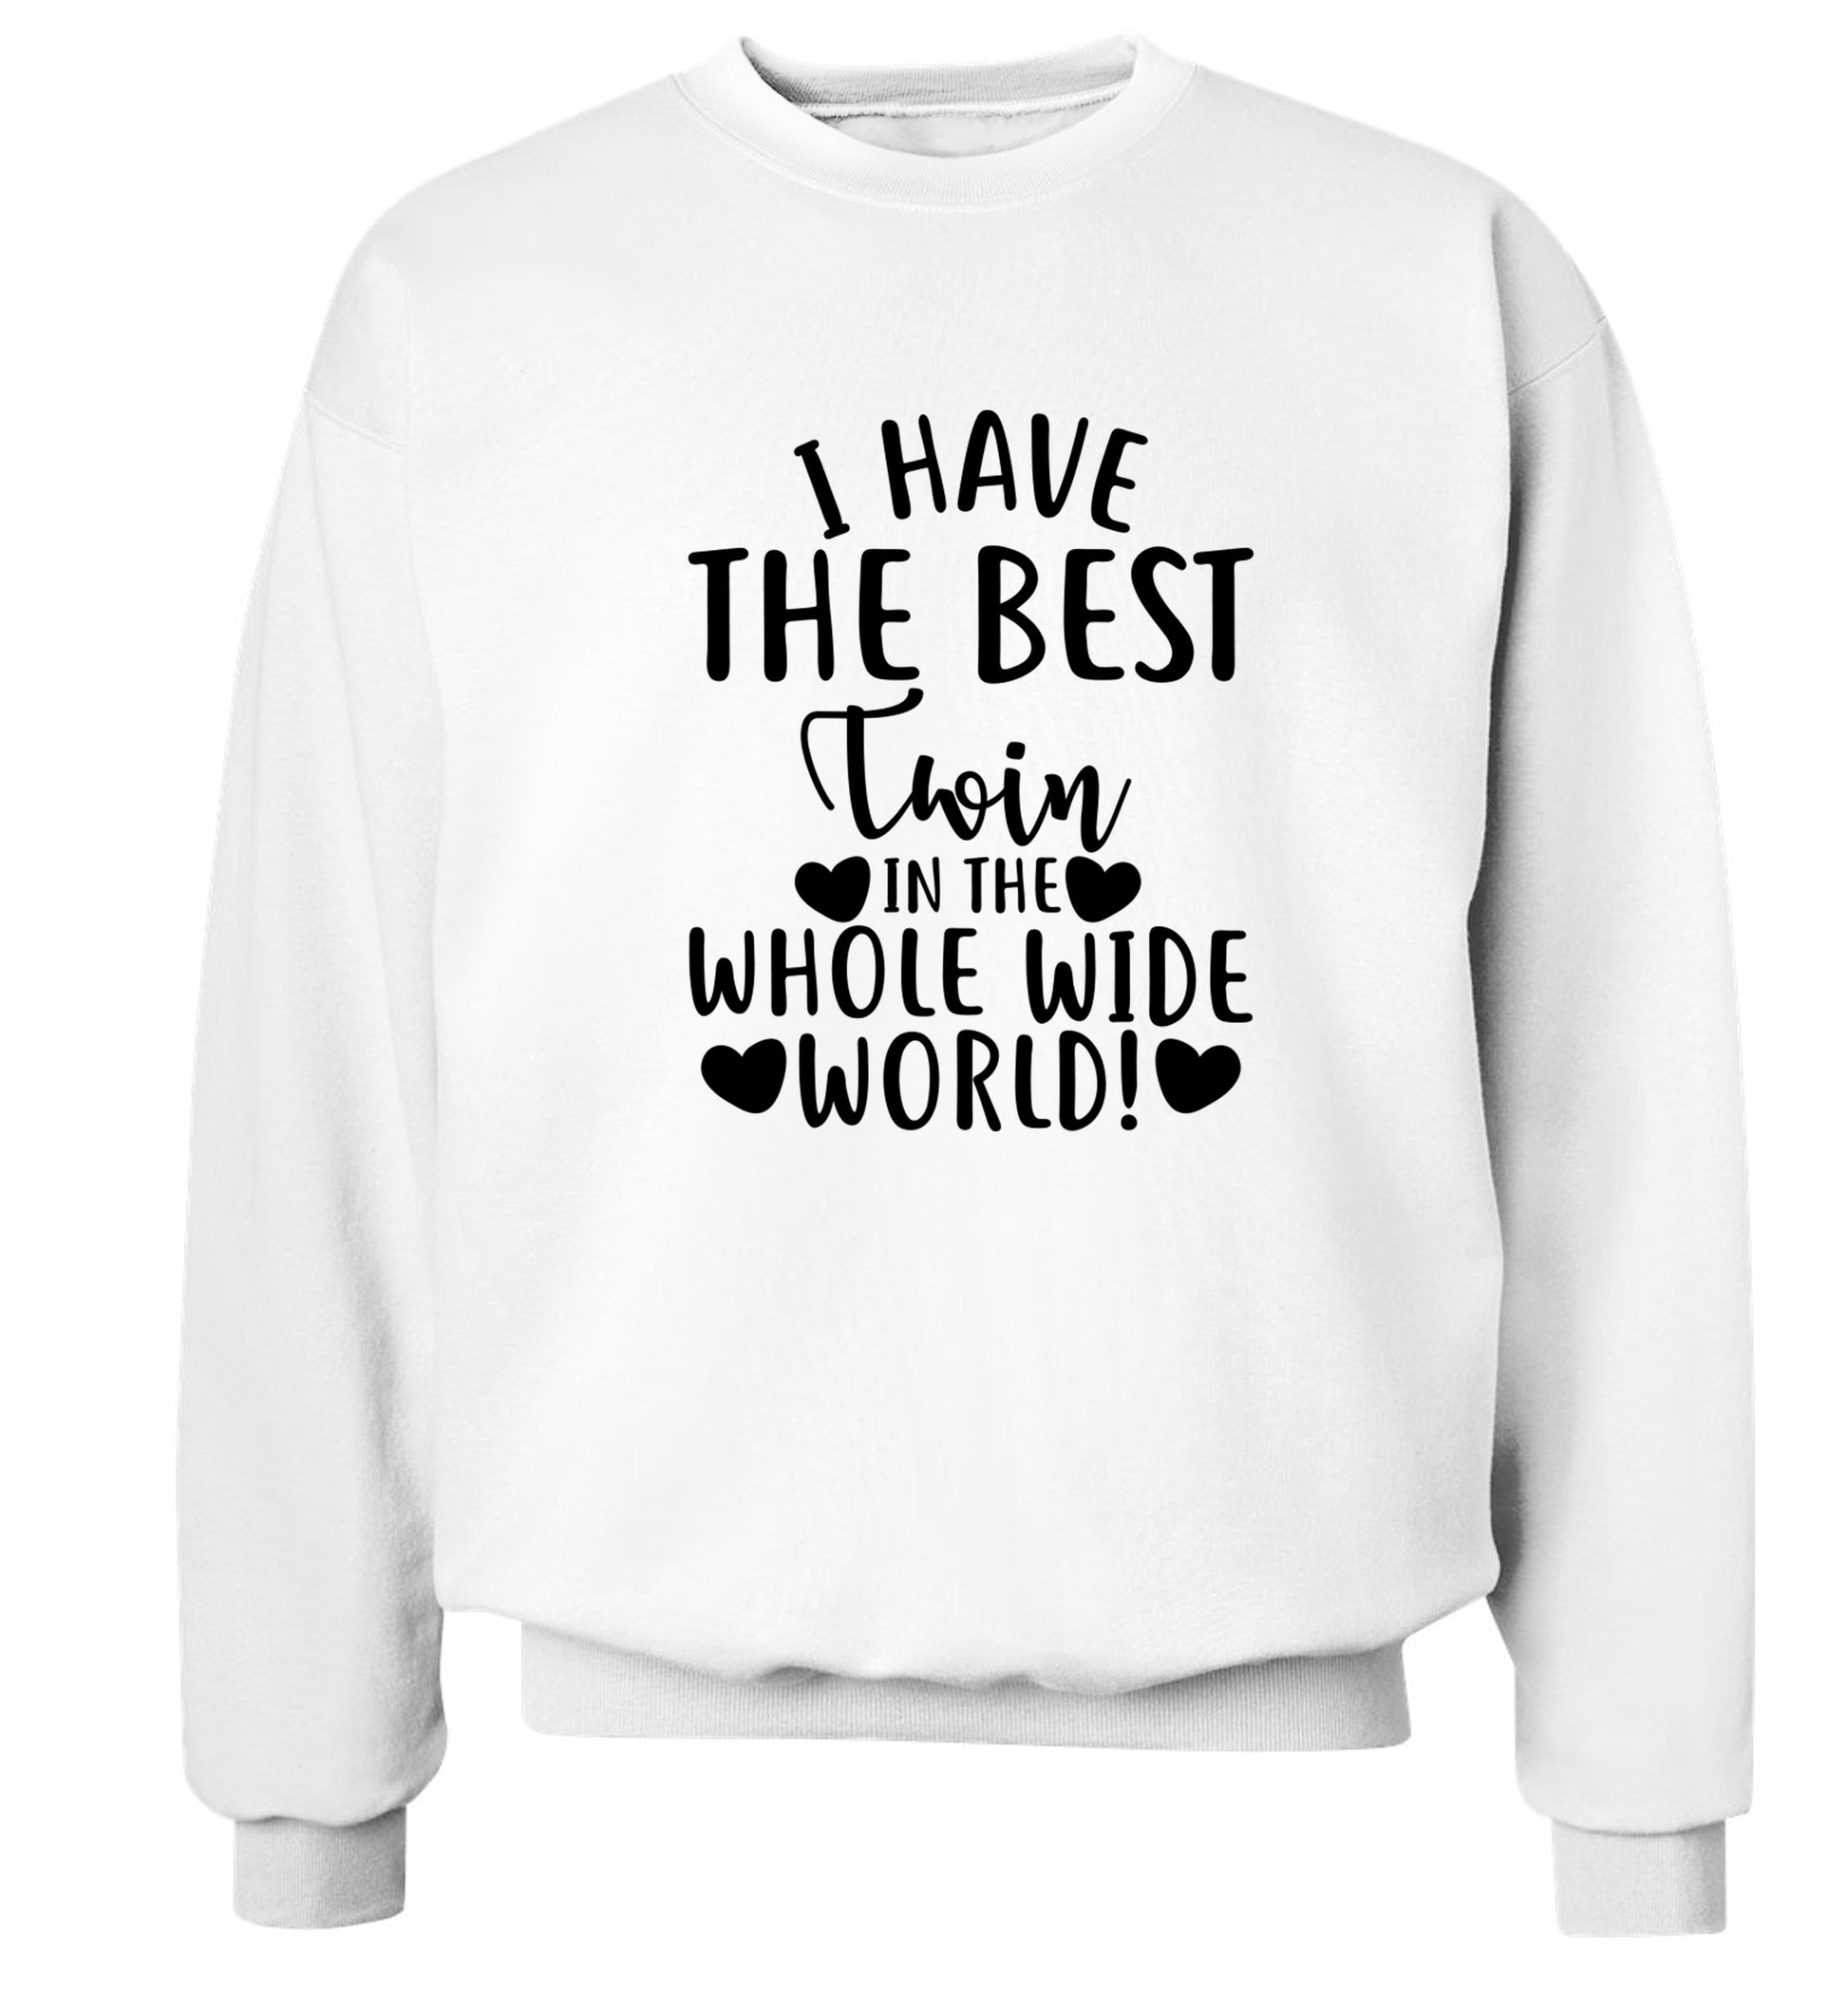 I have the best twin in the whole wide world! Adult's unisex white Sweater 2XL